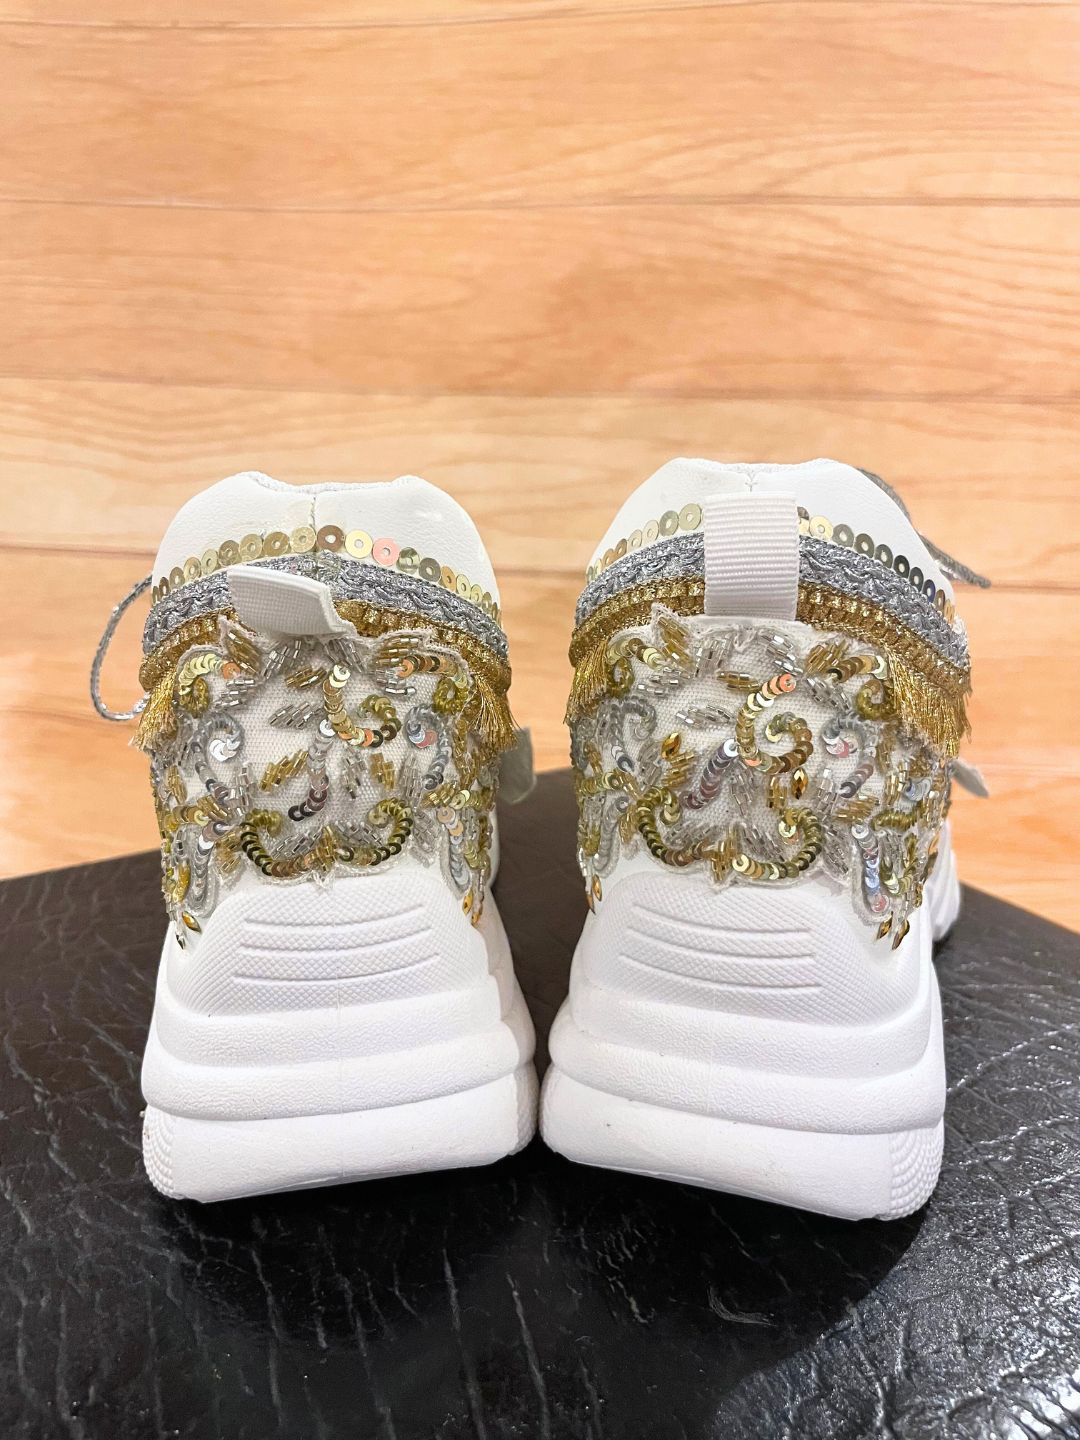 Amazon.com : Rhinestone Sneakers for Women Shiny Sequin Crystal Platform  Shoes with Bowknot Fashion Sneakers Dressy Flat Slip Ons Loafers Cute  Comfortable Round Toe Glitter Bling Shoes Flatform Party Dress Shoes :